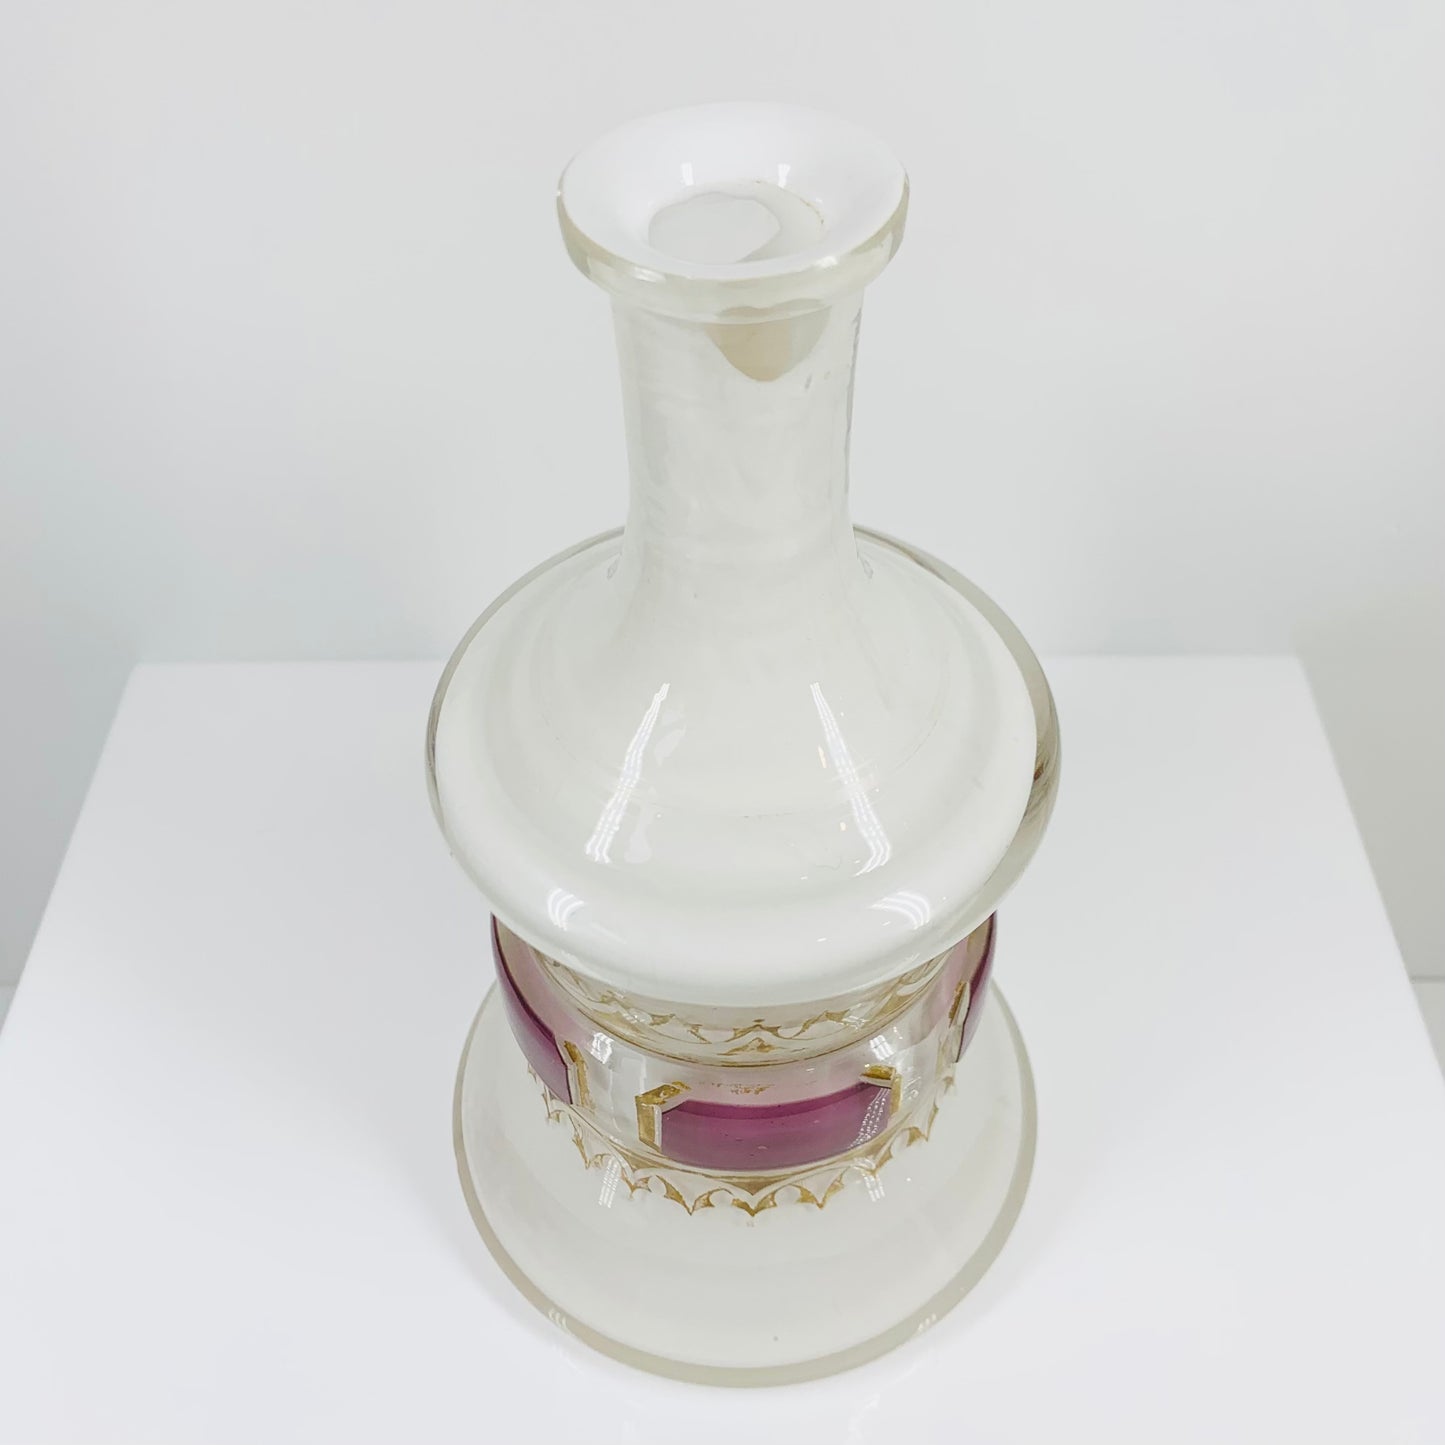 Antique cased white glass bottle vase with gold and purple gilding